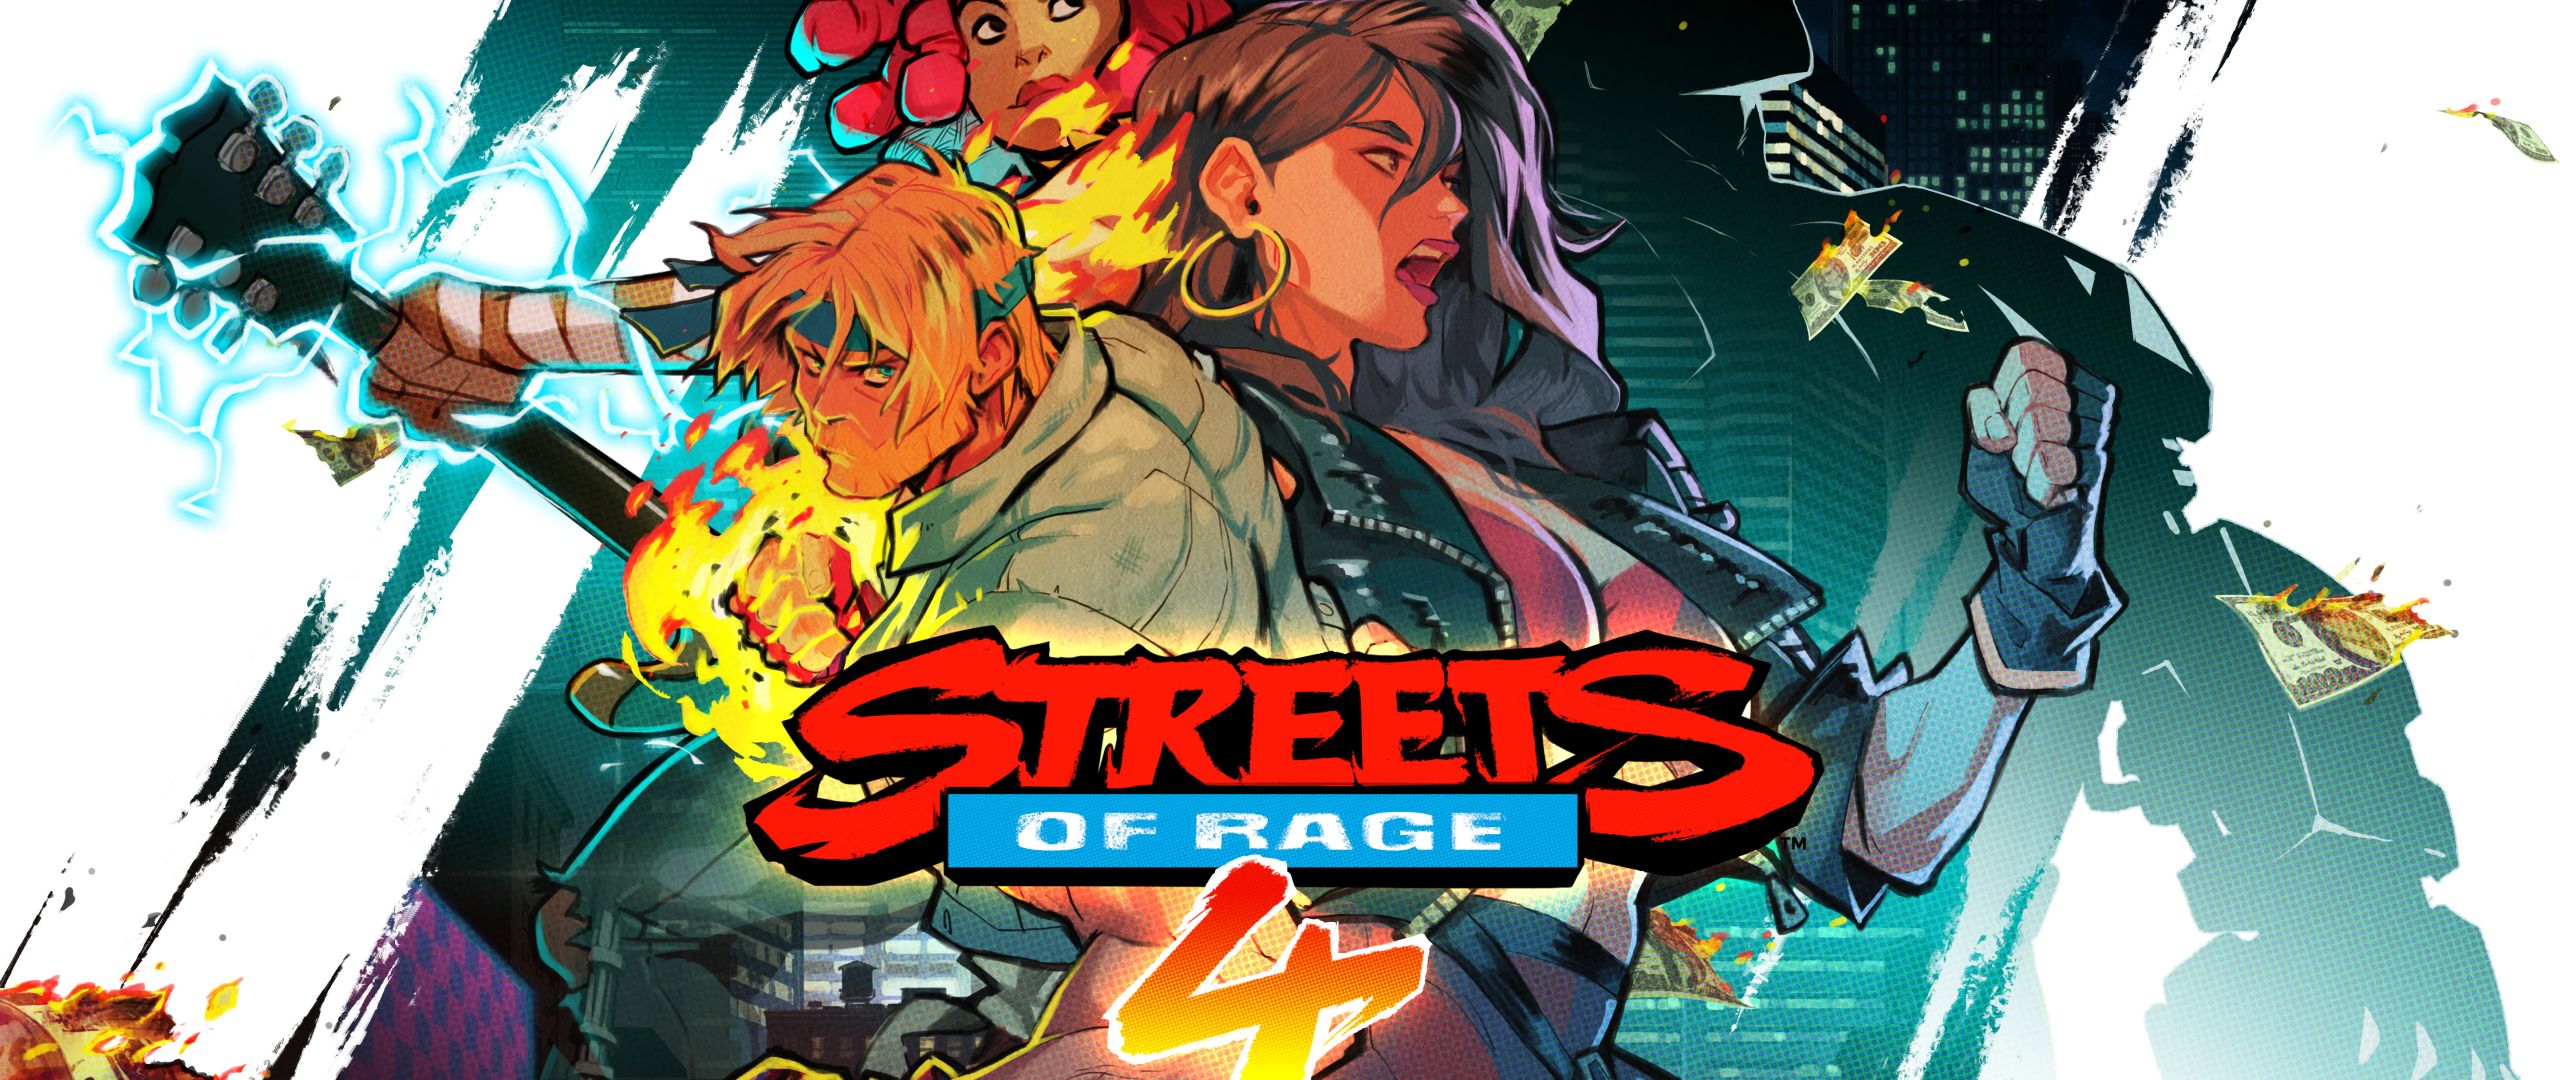 Streets of Rage 4 Poster 2560x1080 Resolution Wallpaper